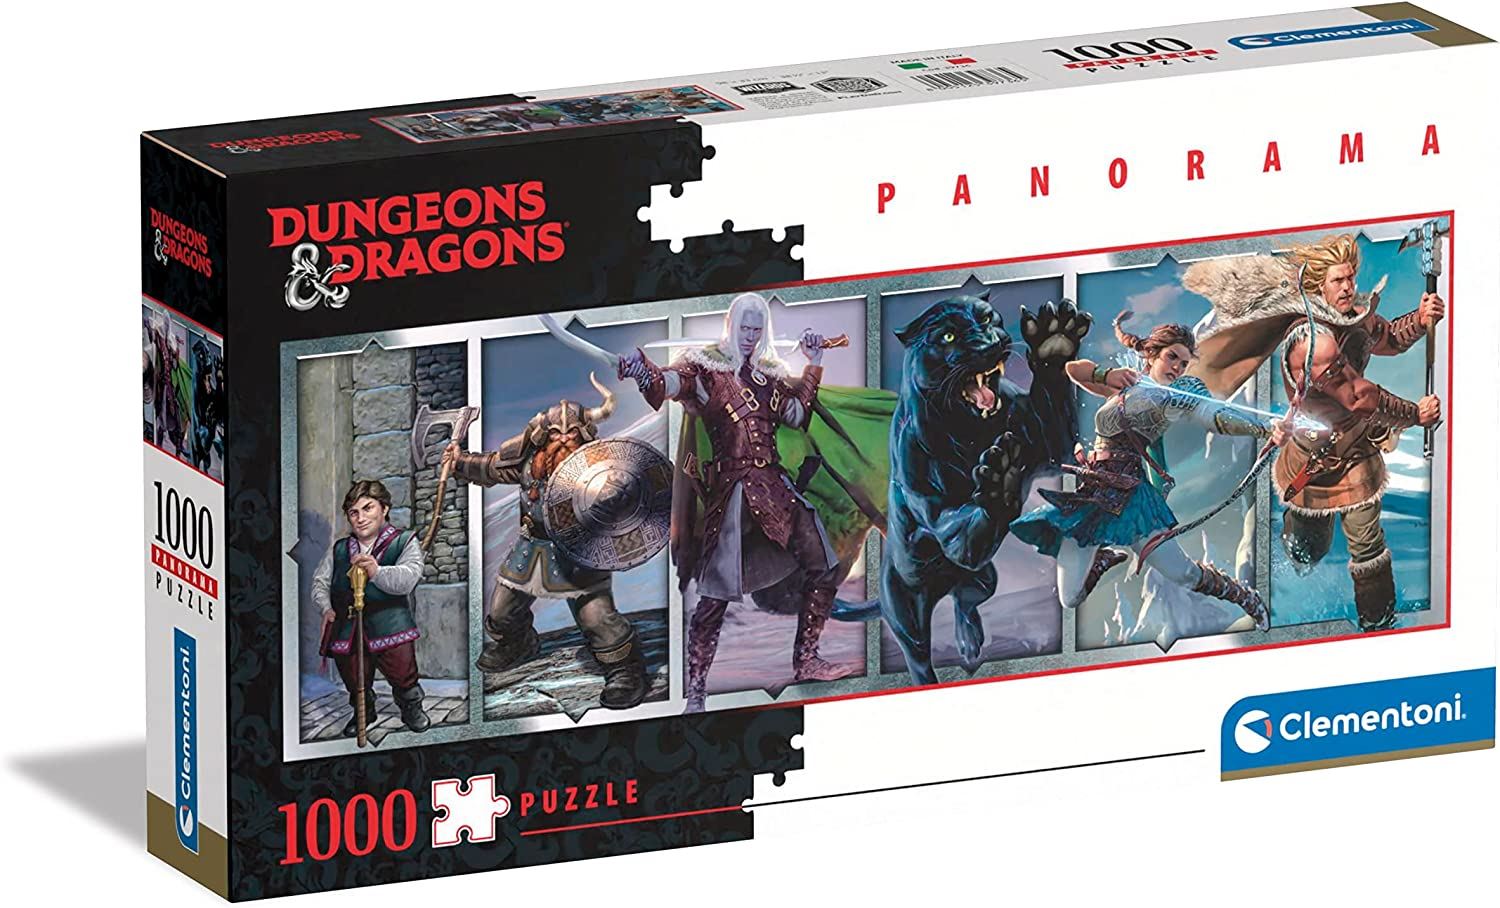 Dungeons and Dragons Panorama Jigsaw Puzzle 1000 Pieces